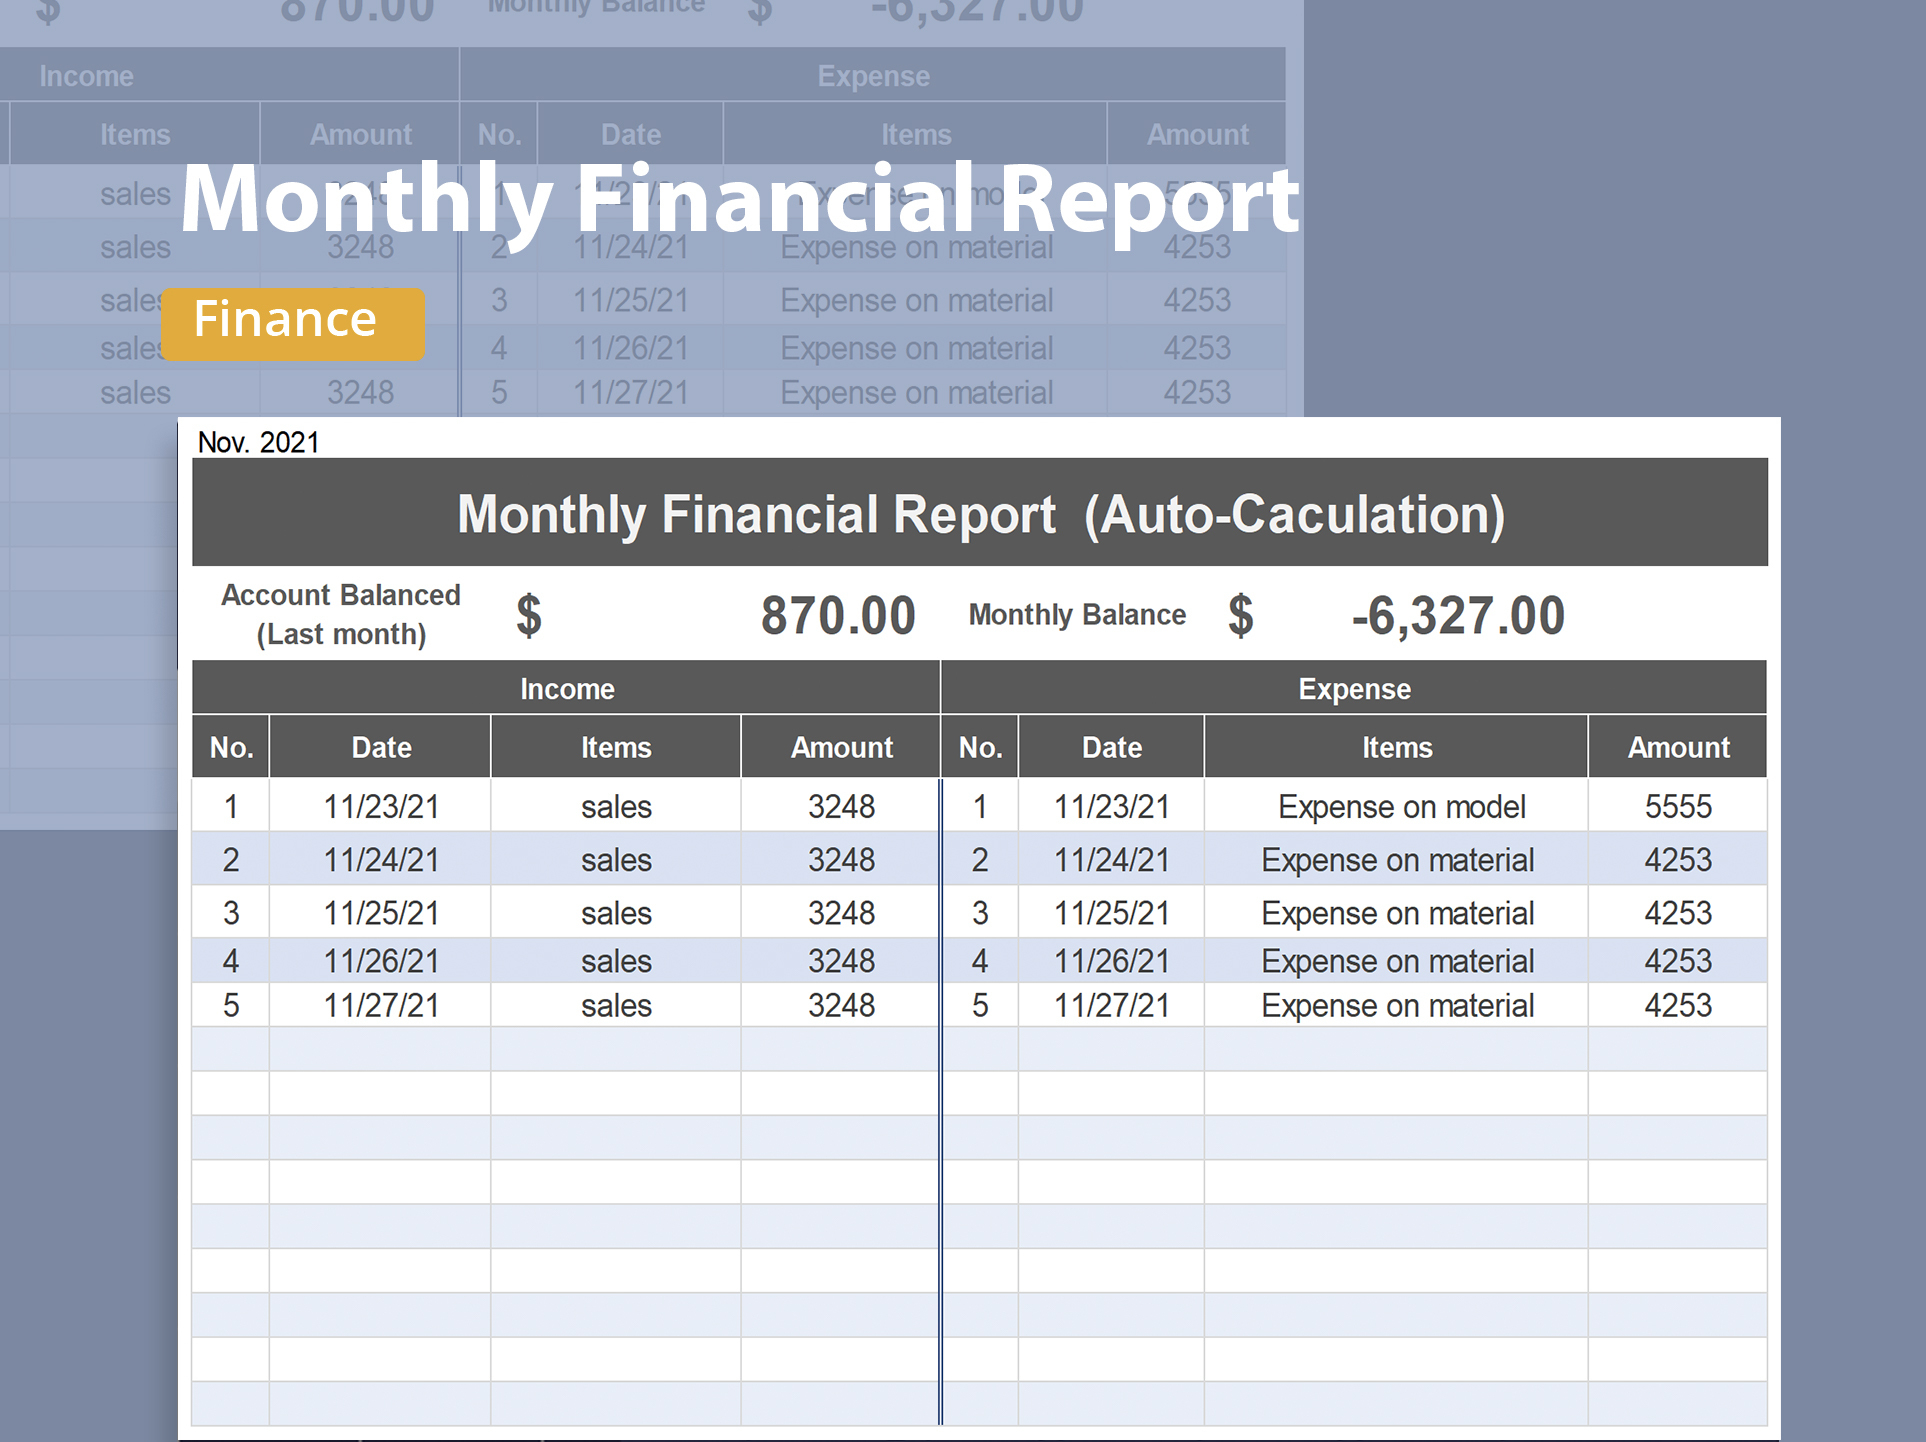 EXCEL of Monthly Financial Report